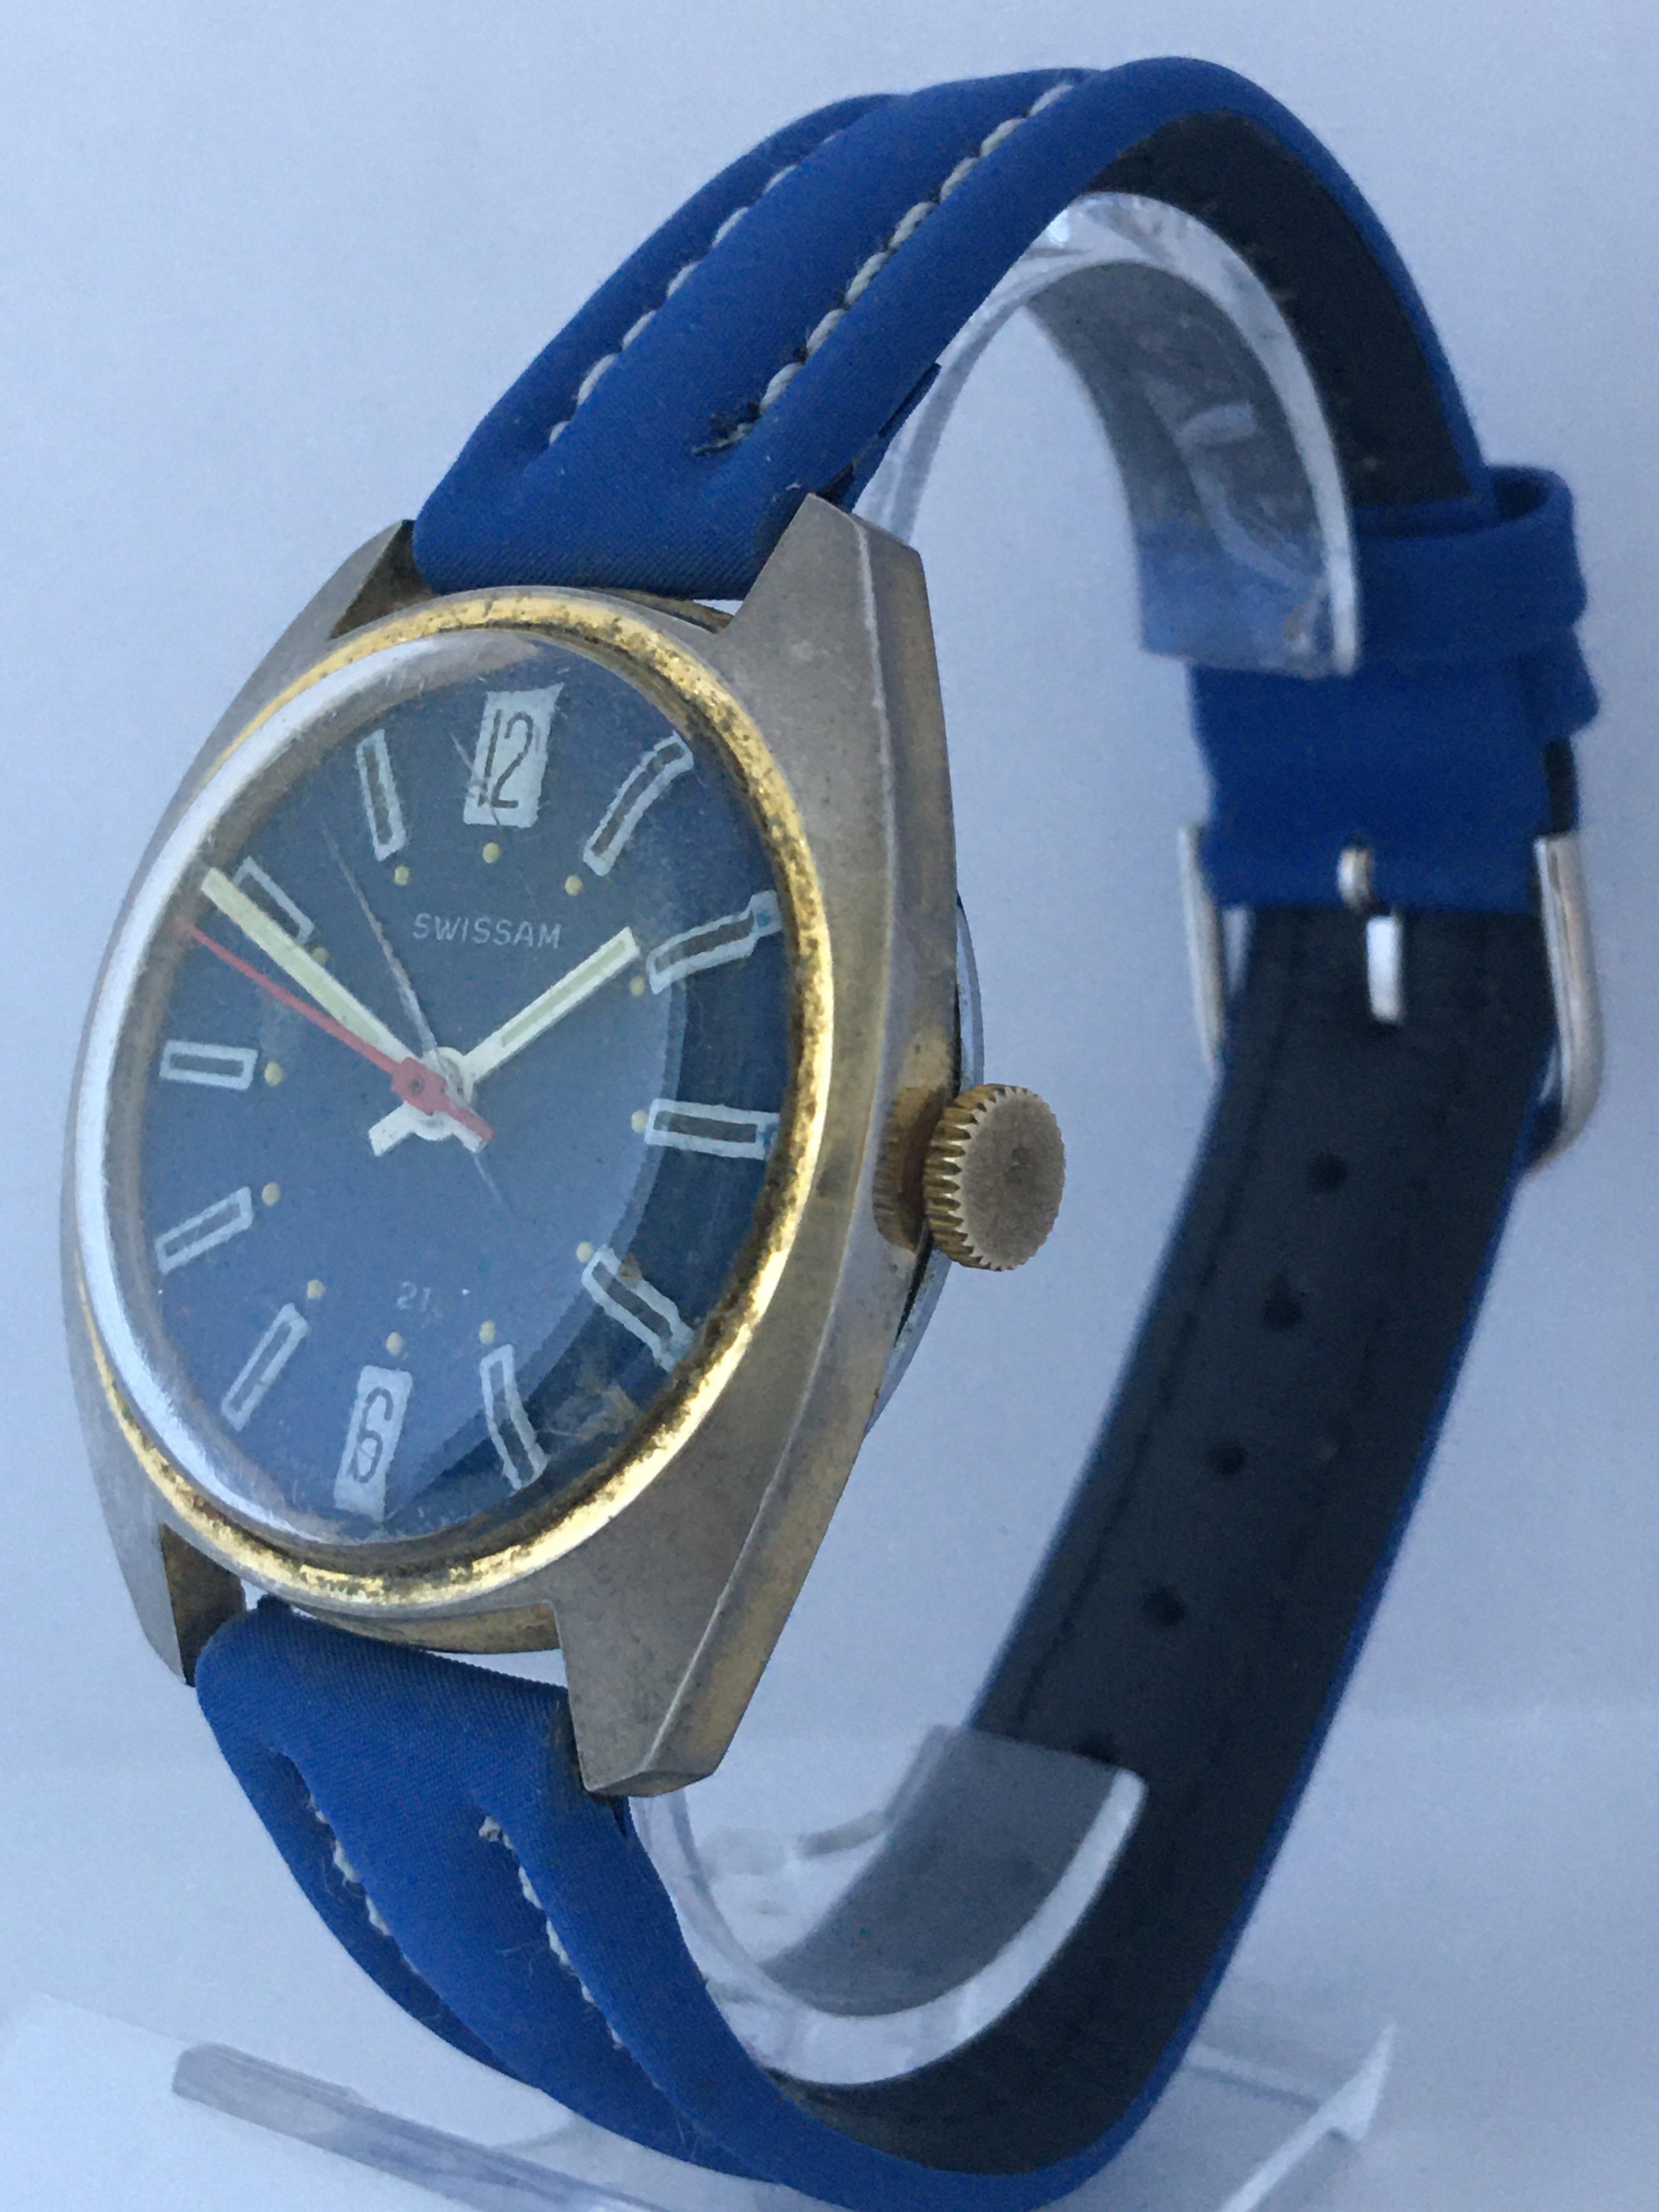 This 35mm pre-owned vintage hand winding swiss watch is in good working condition and it is running well. Visible signs of ageing and wear with some scratches on the glass and on the watch case as shown. The gold plated metal case is tarnished as